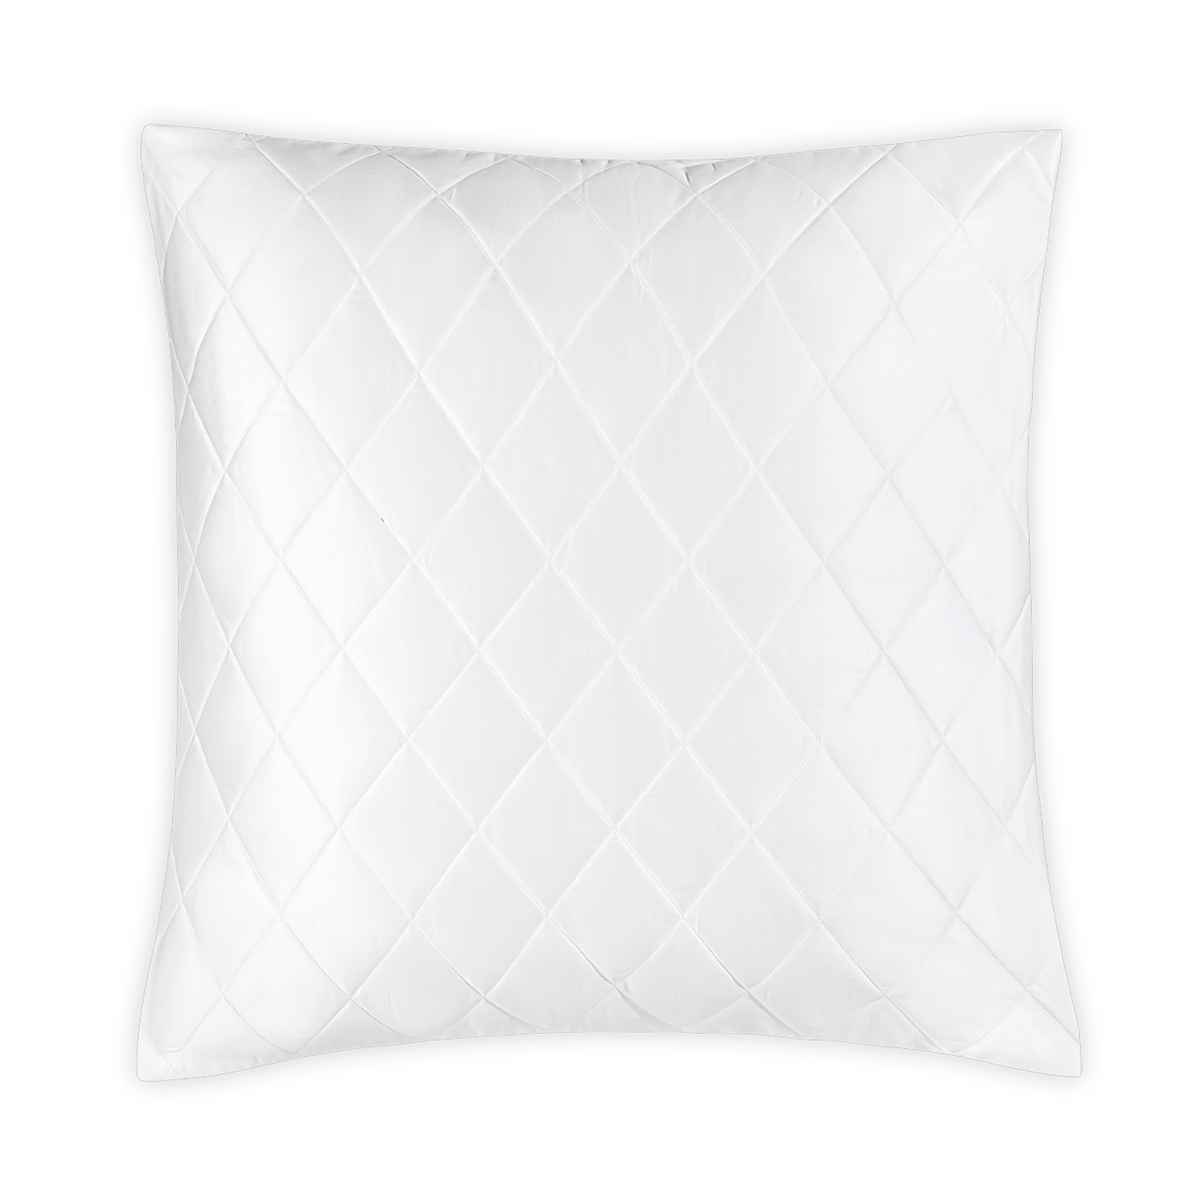 Silo Image of Matouk Nocturne Quilted Bedding Boudoir Euro in White